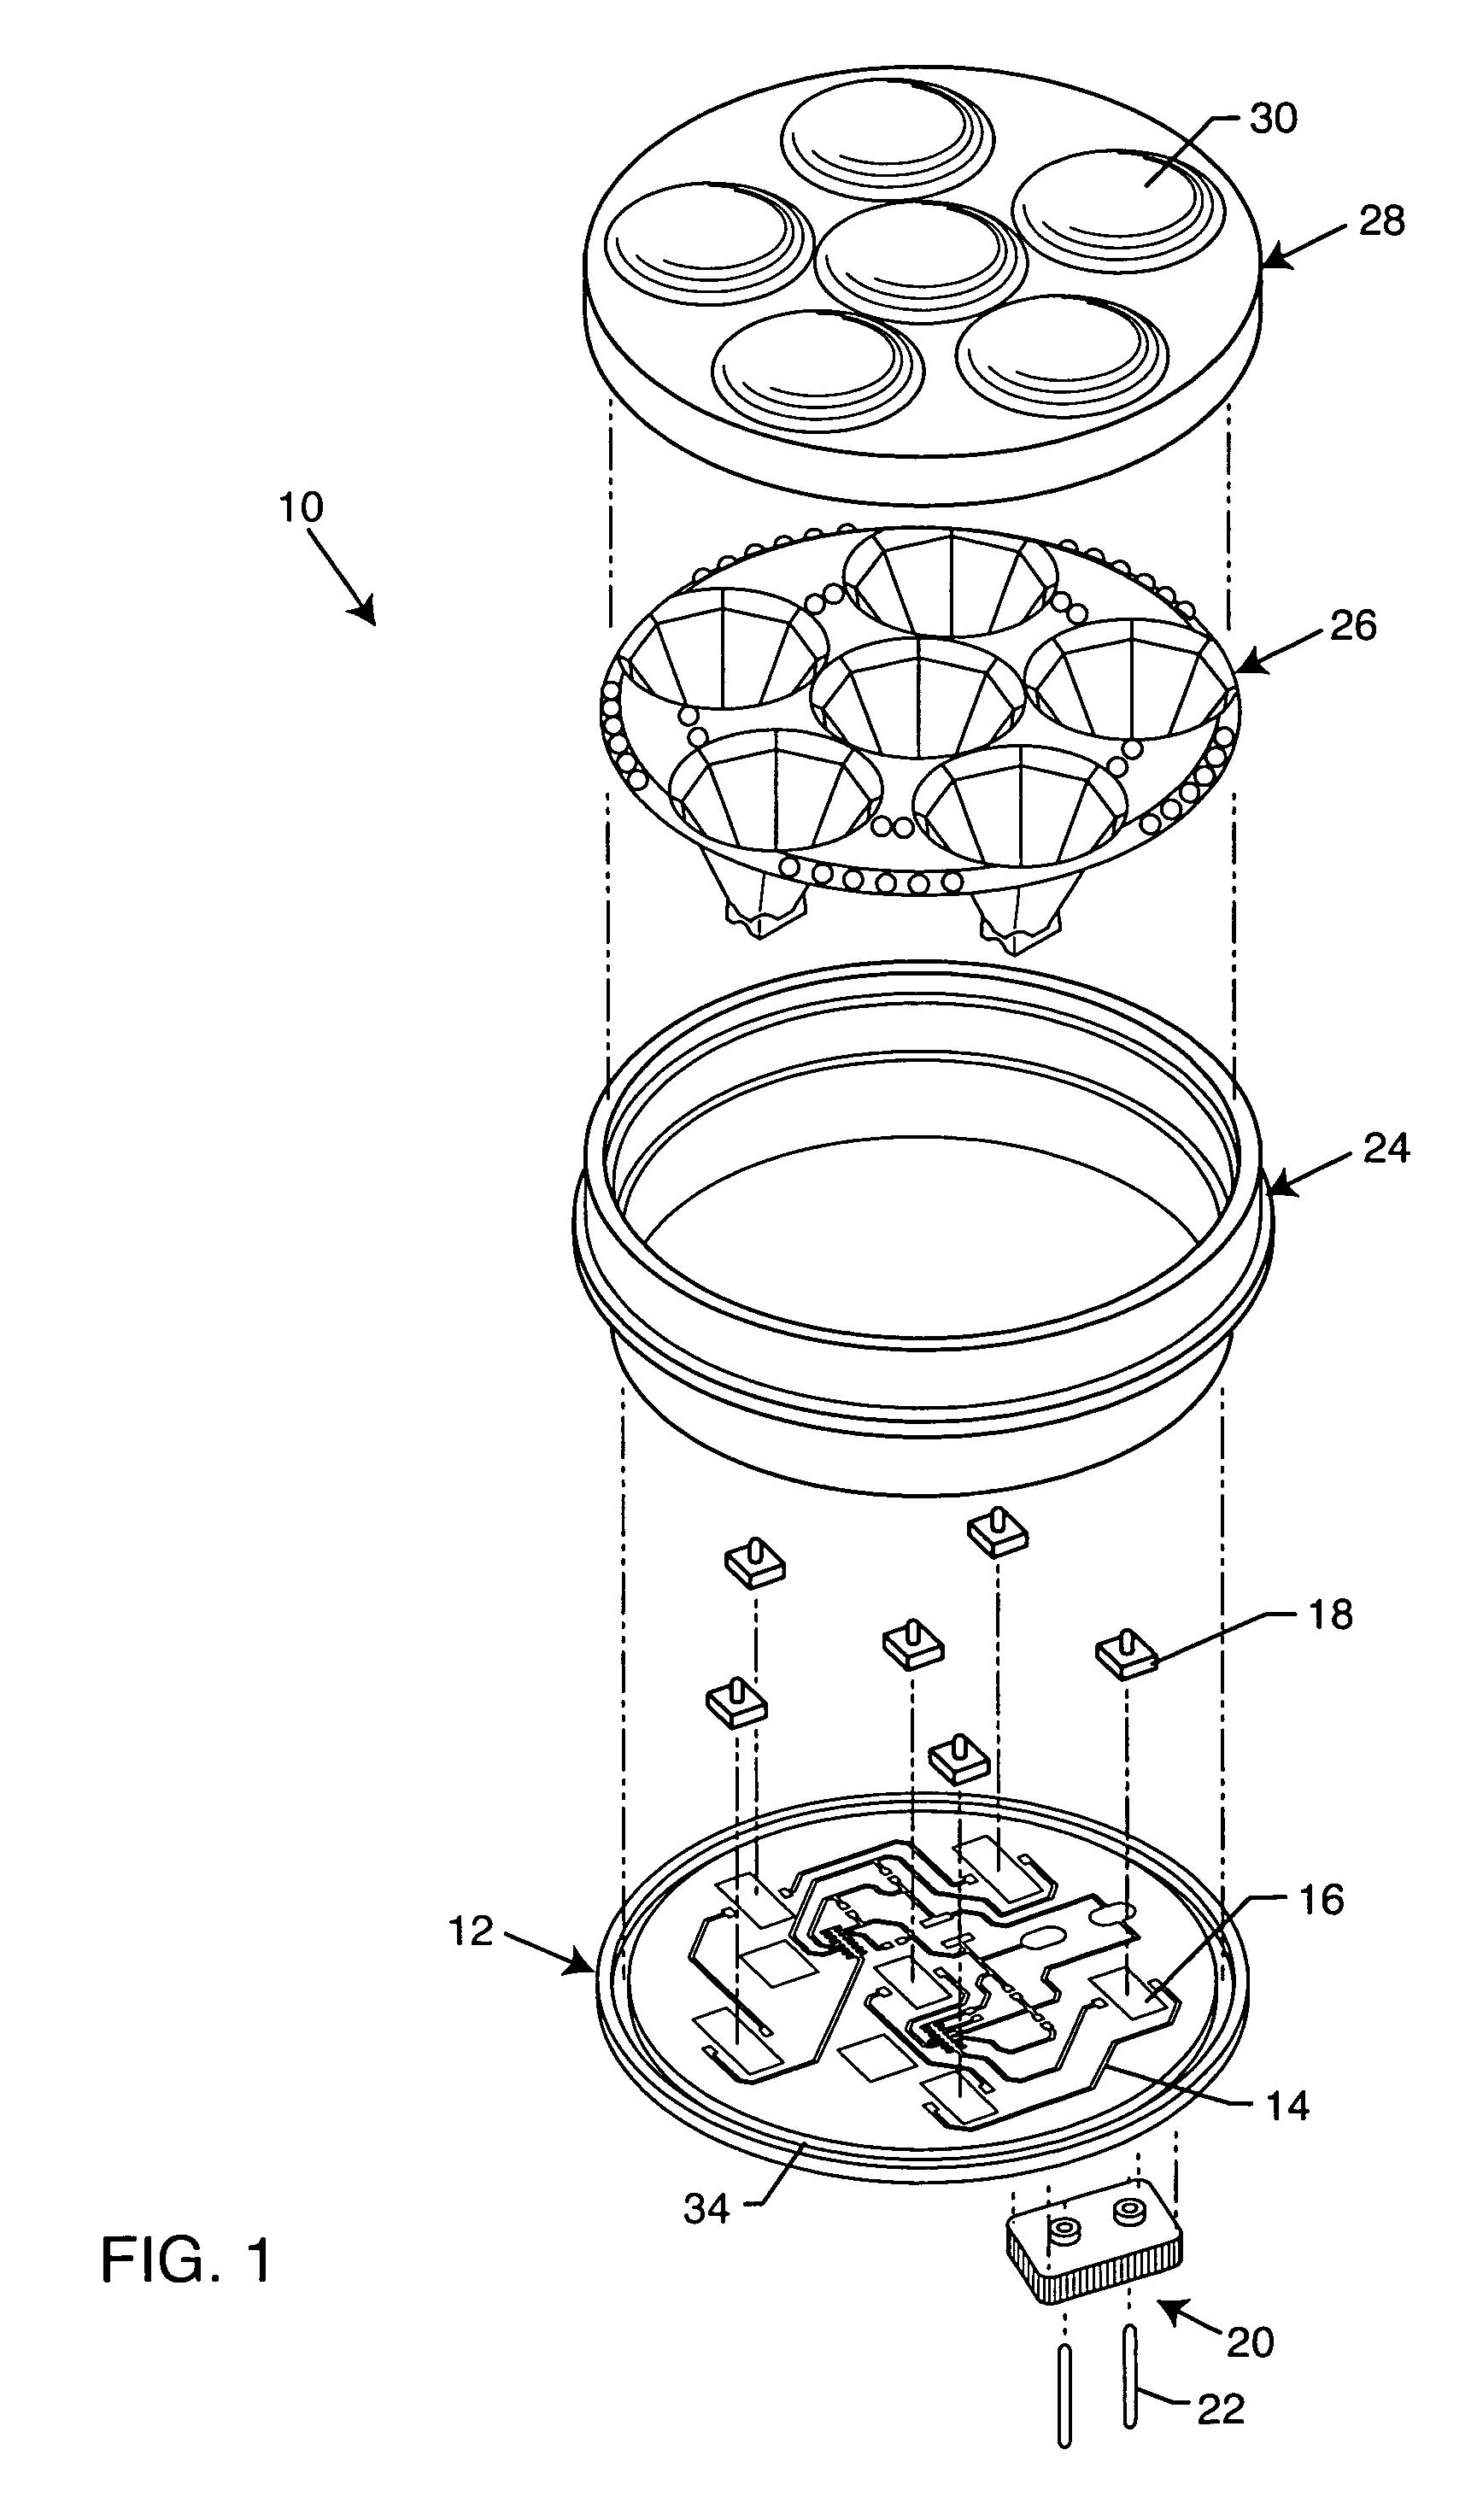 Process for manufacturing an LED lamp with integrated heat sink